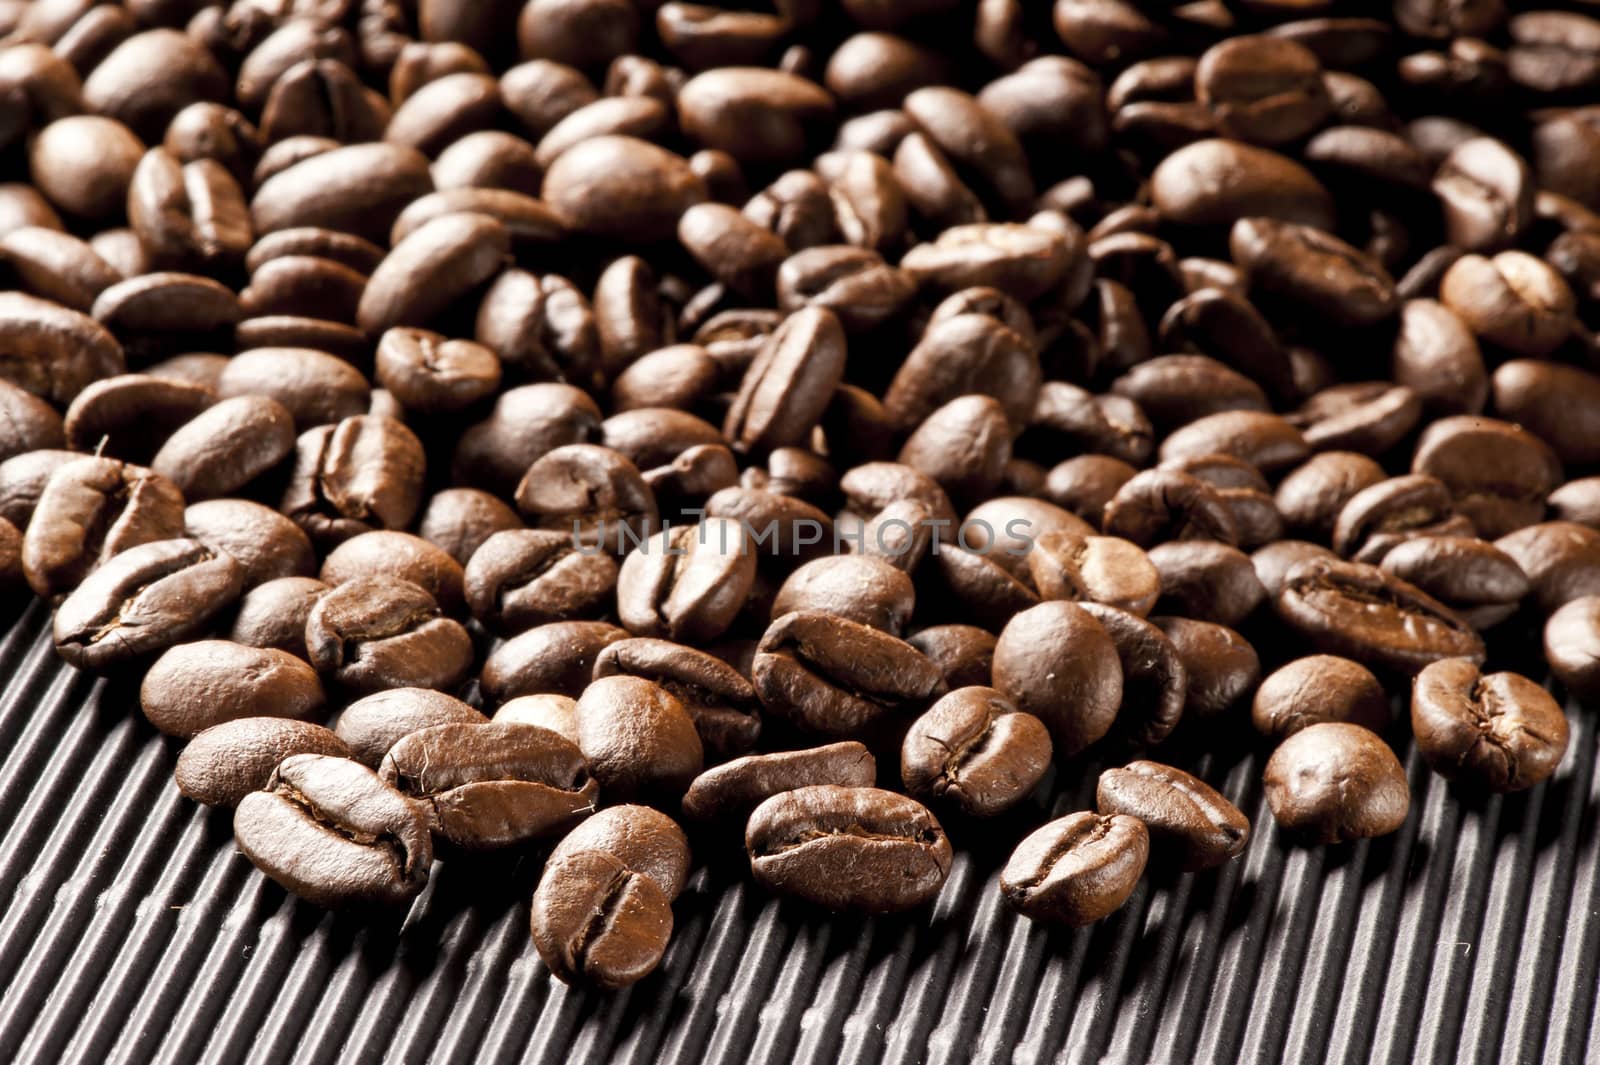 Coffee beans scattered by kosmsos111